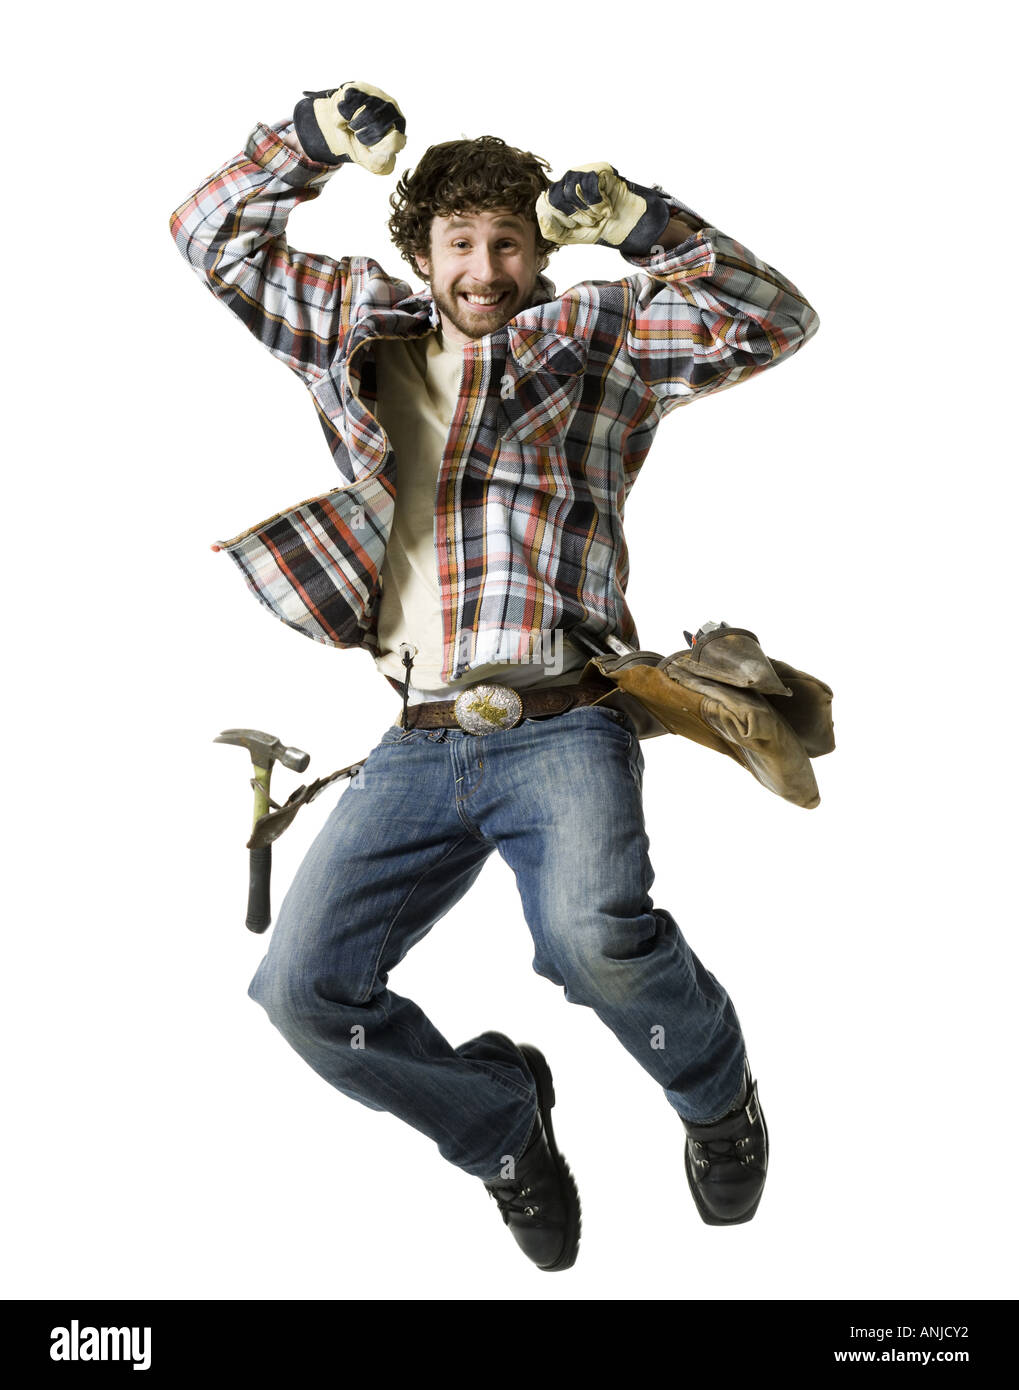 Low angle view of a young man jumping in mid air Stock Photo